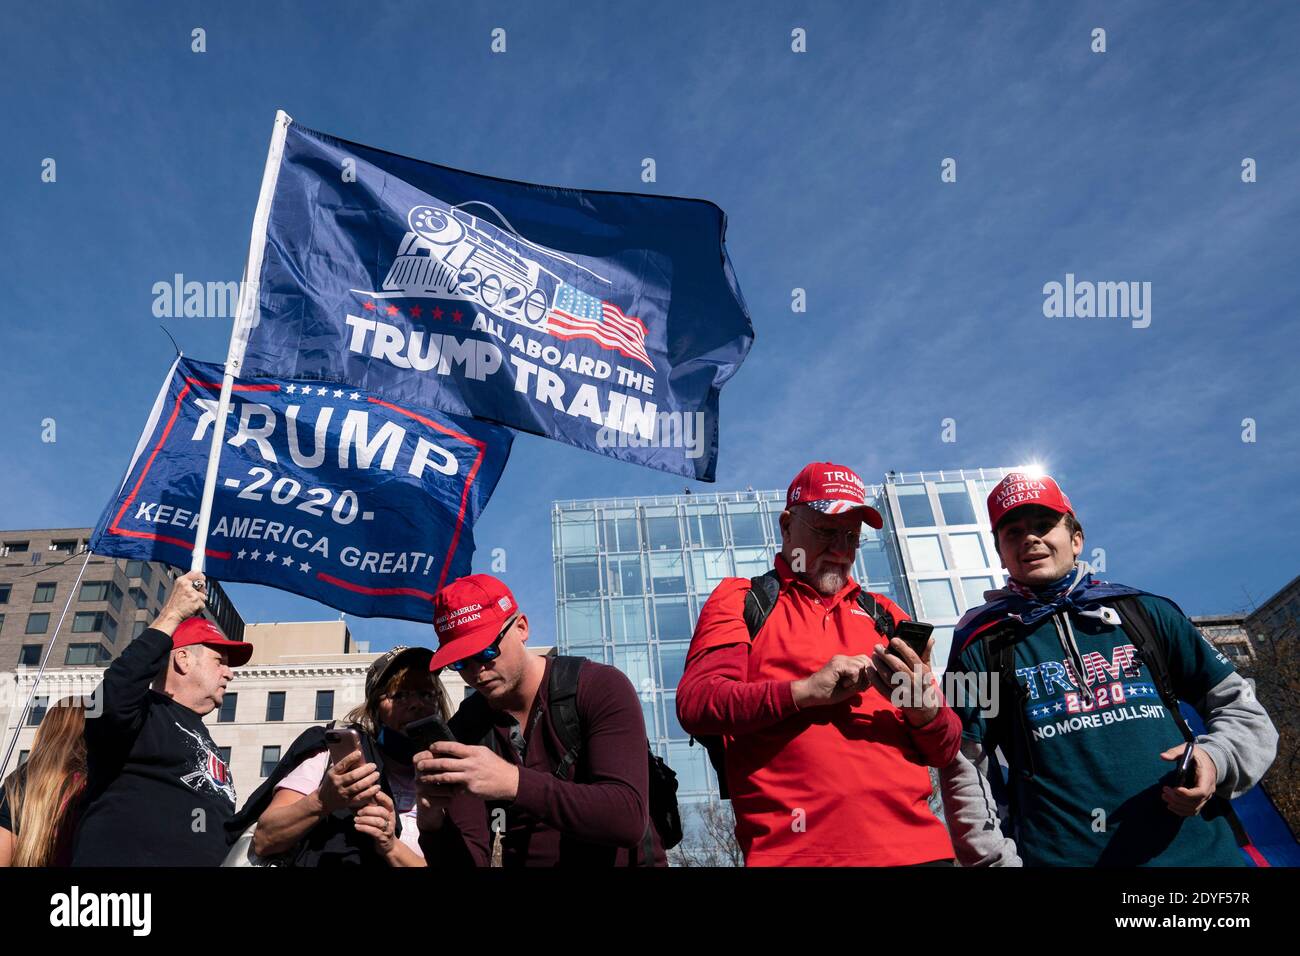 Supporters of US president Donald Trump arrive for a rally at Freedom Plaza near the White House in Washington, D.C., U.S., on Saturday, Nov. 14, 2020. Credit: Alex Edelman/The Photo Access Stock Photo